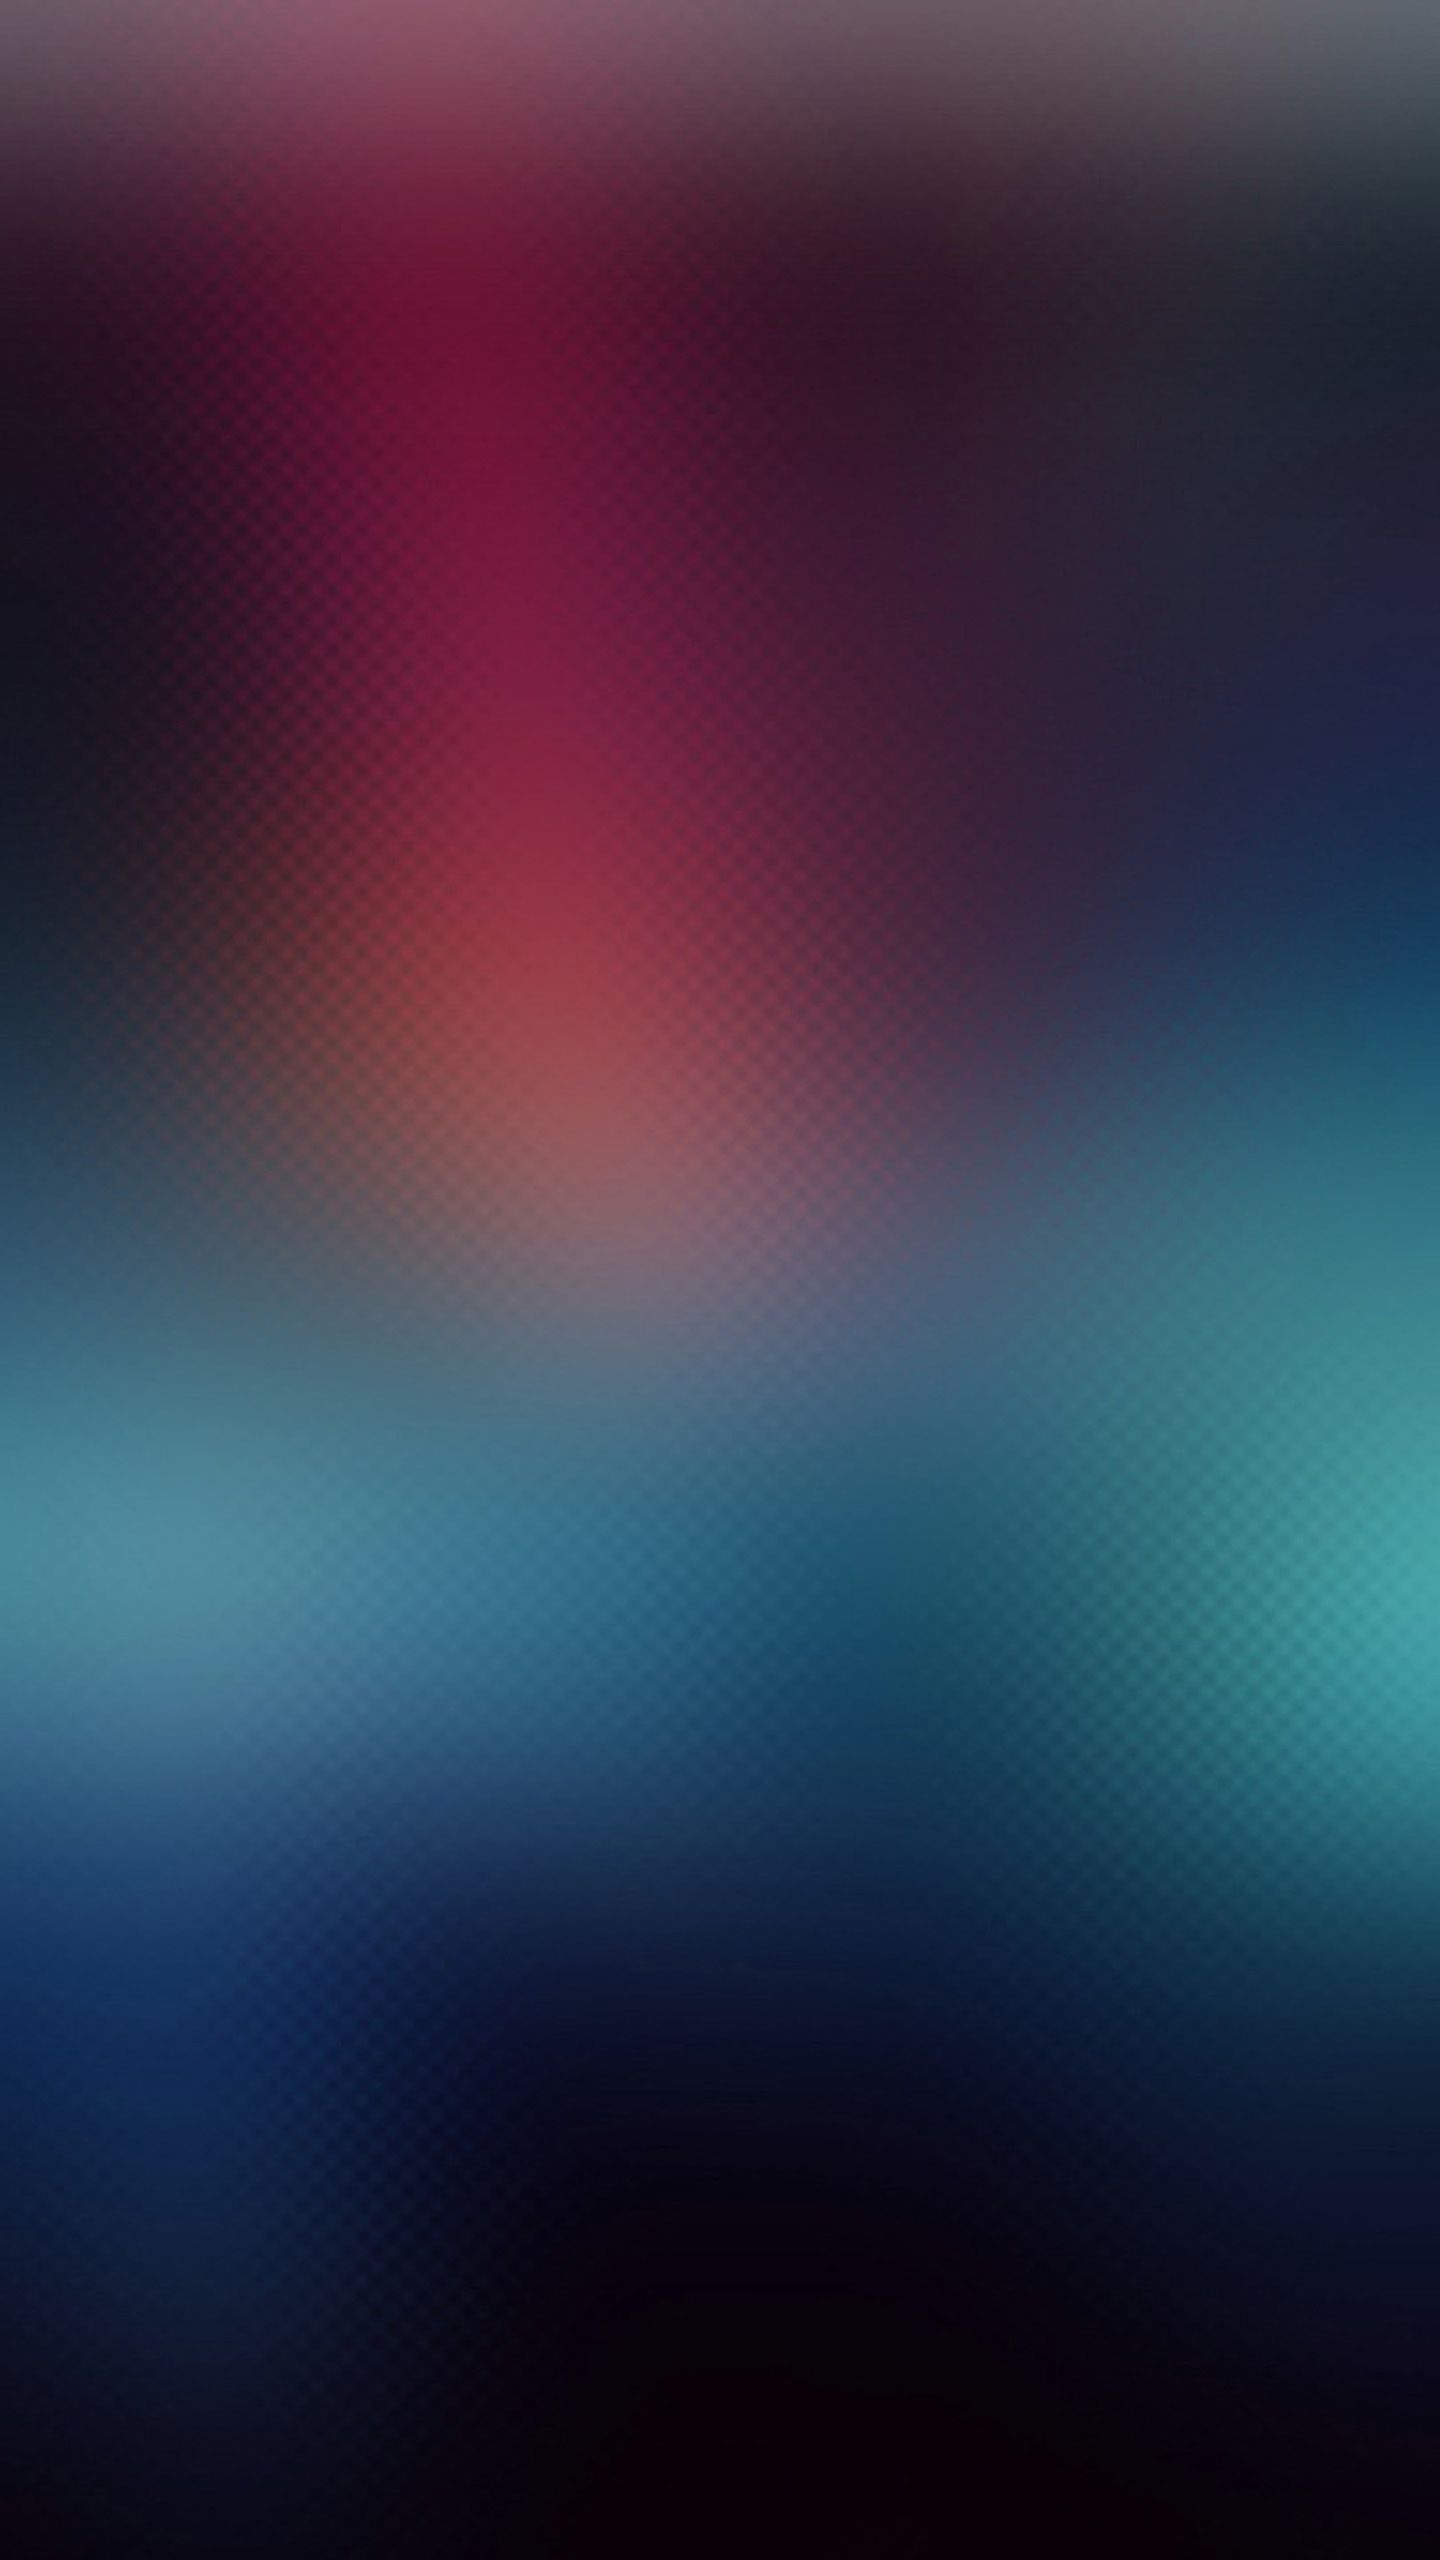 Dark Blurred Wallpapers For Iphone